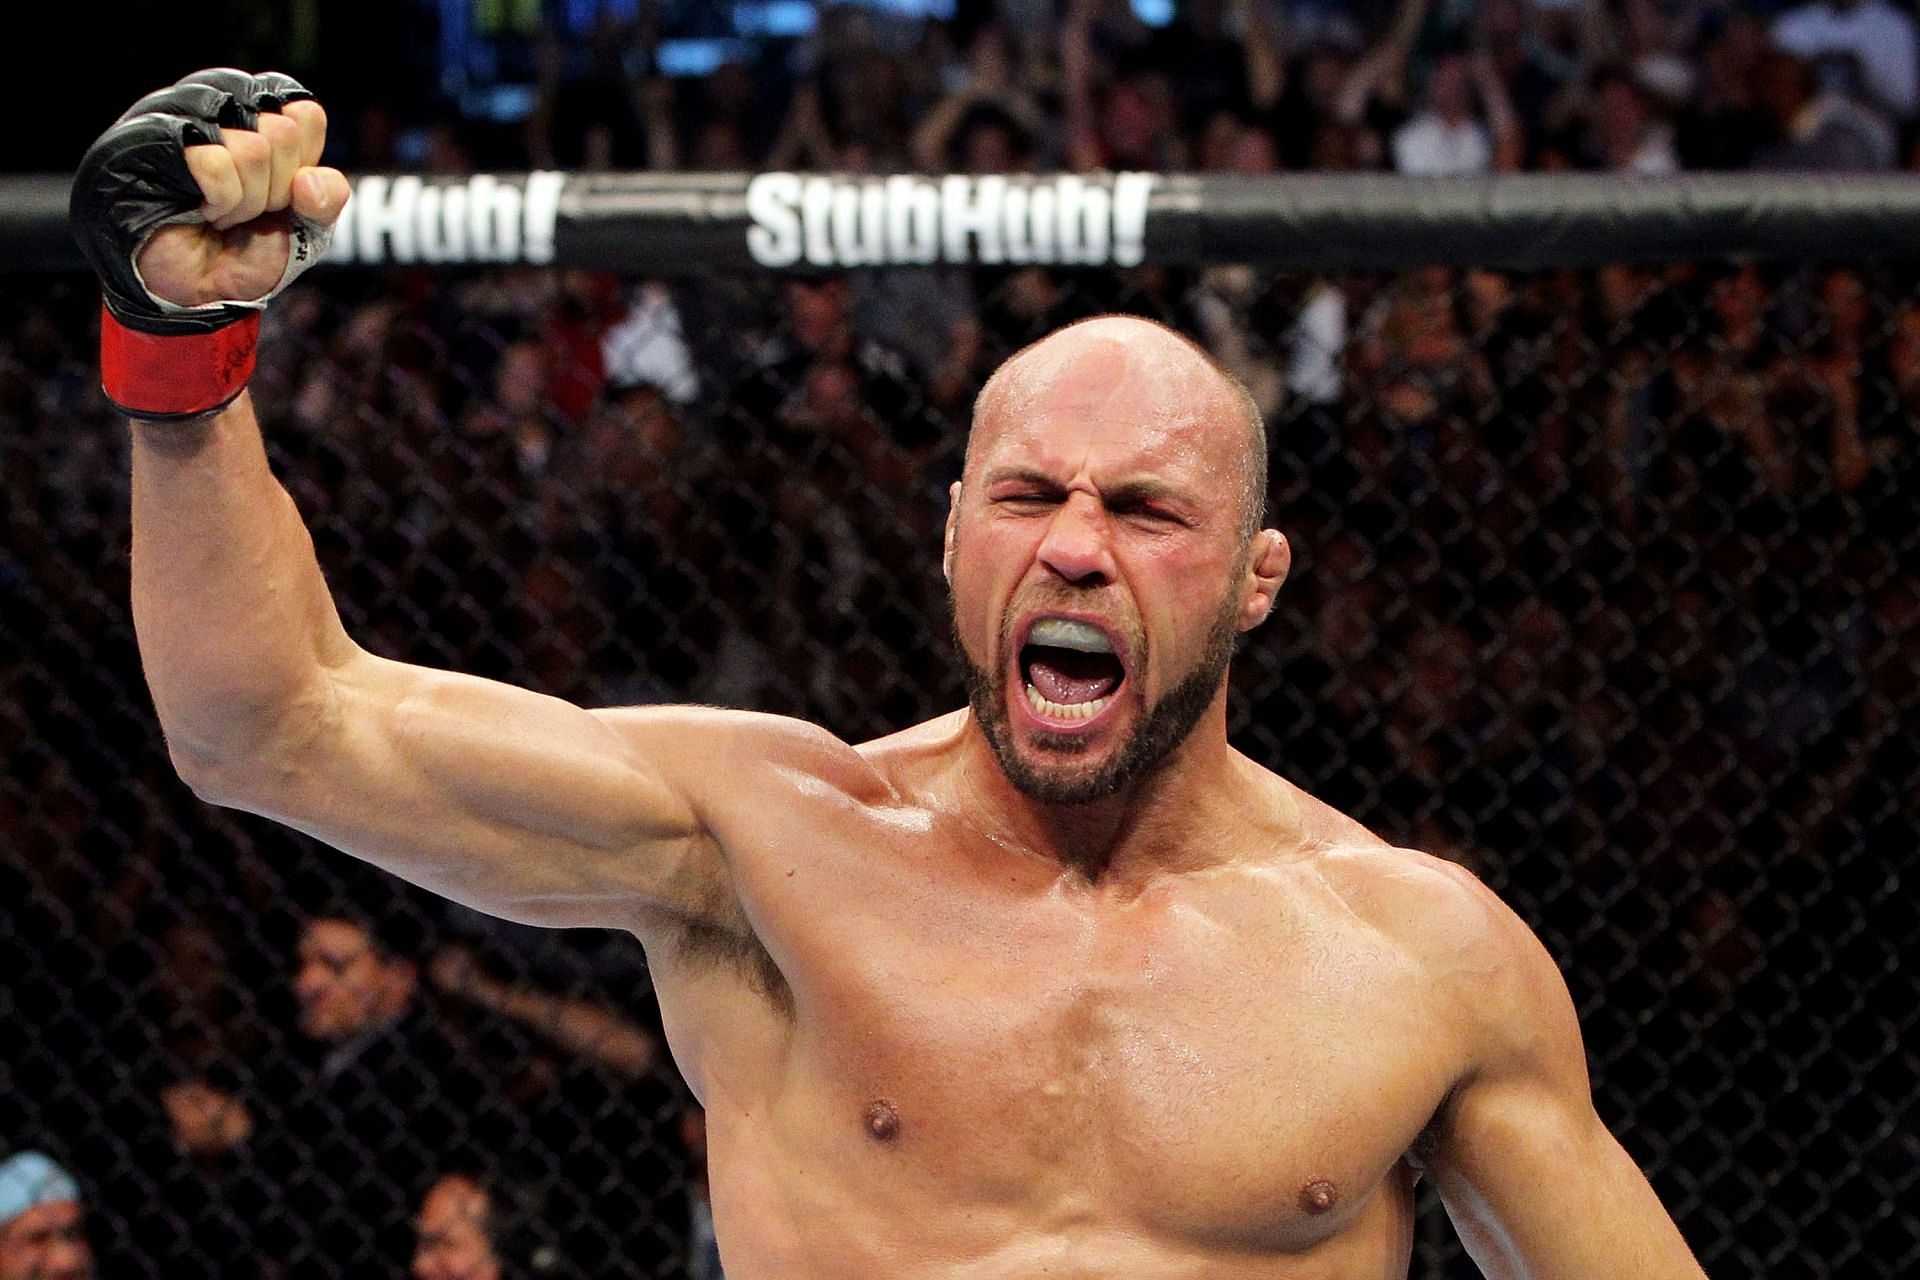 Randy Couture returned to action a year after hanging up his gloves - and won the heavyweight title